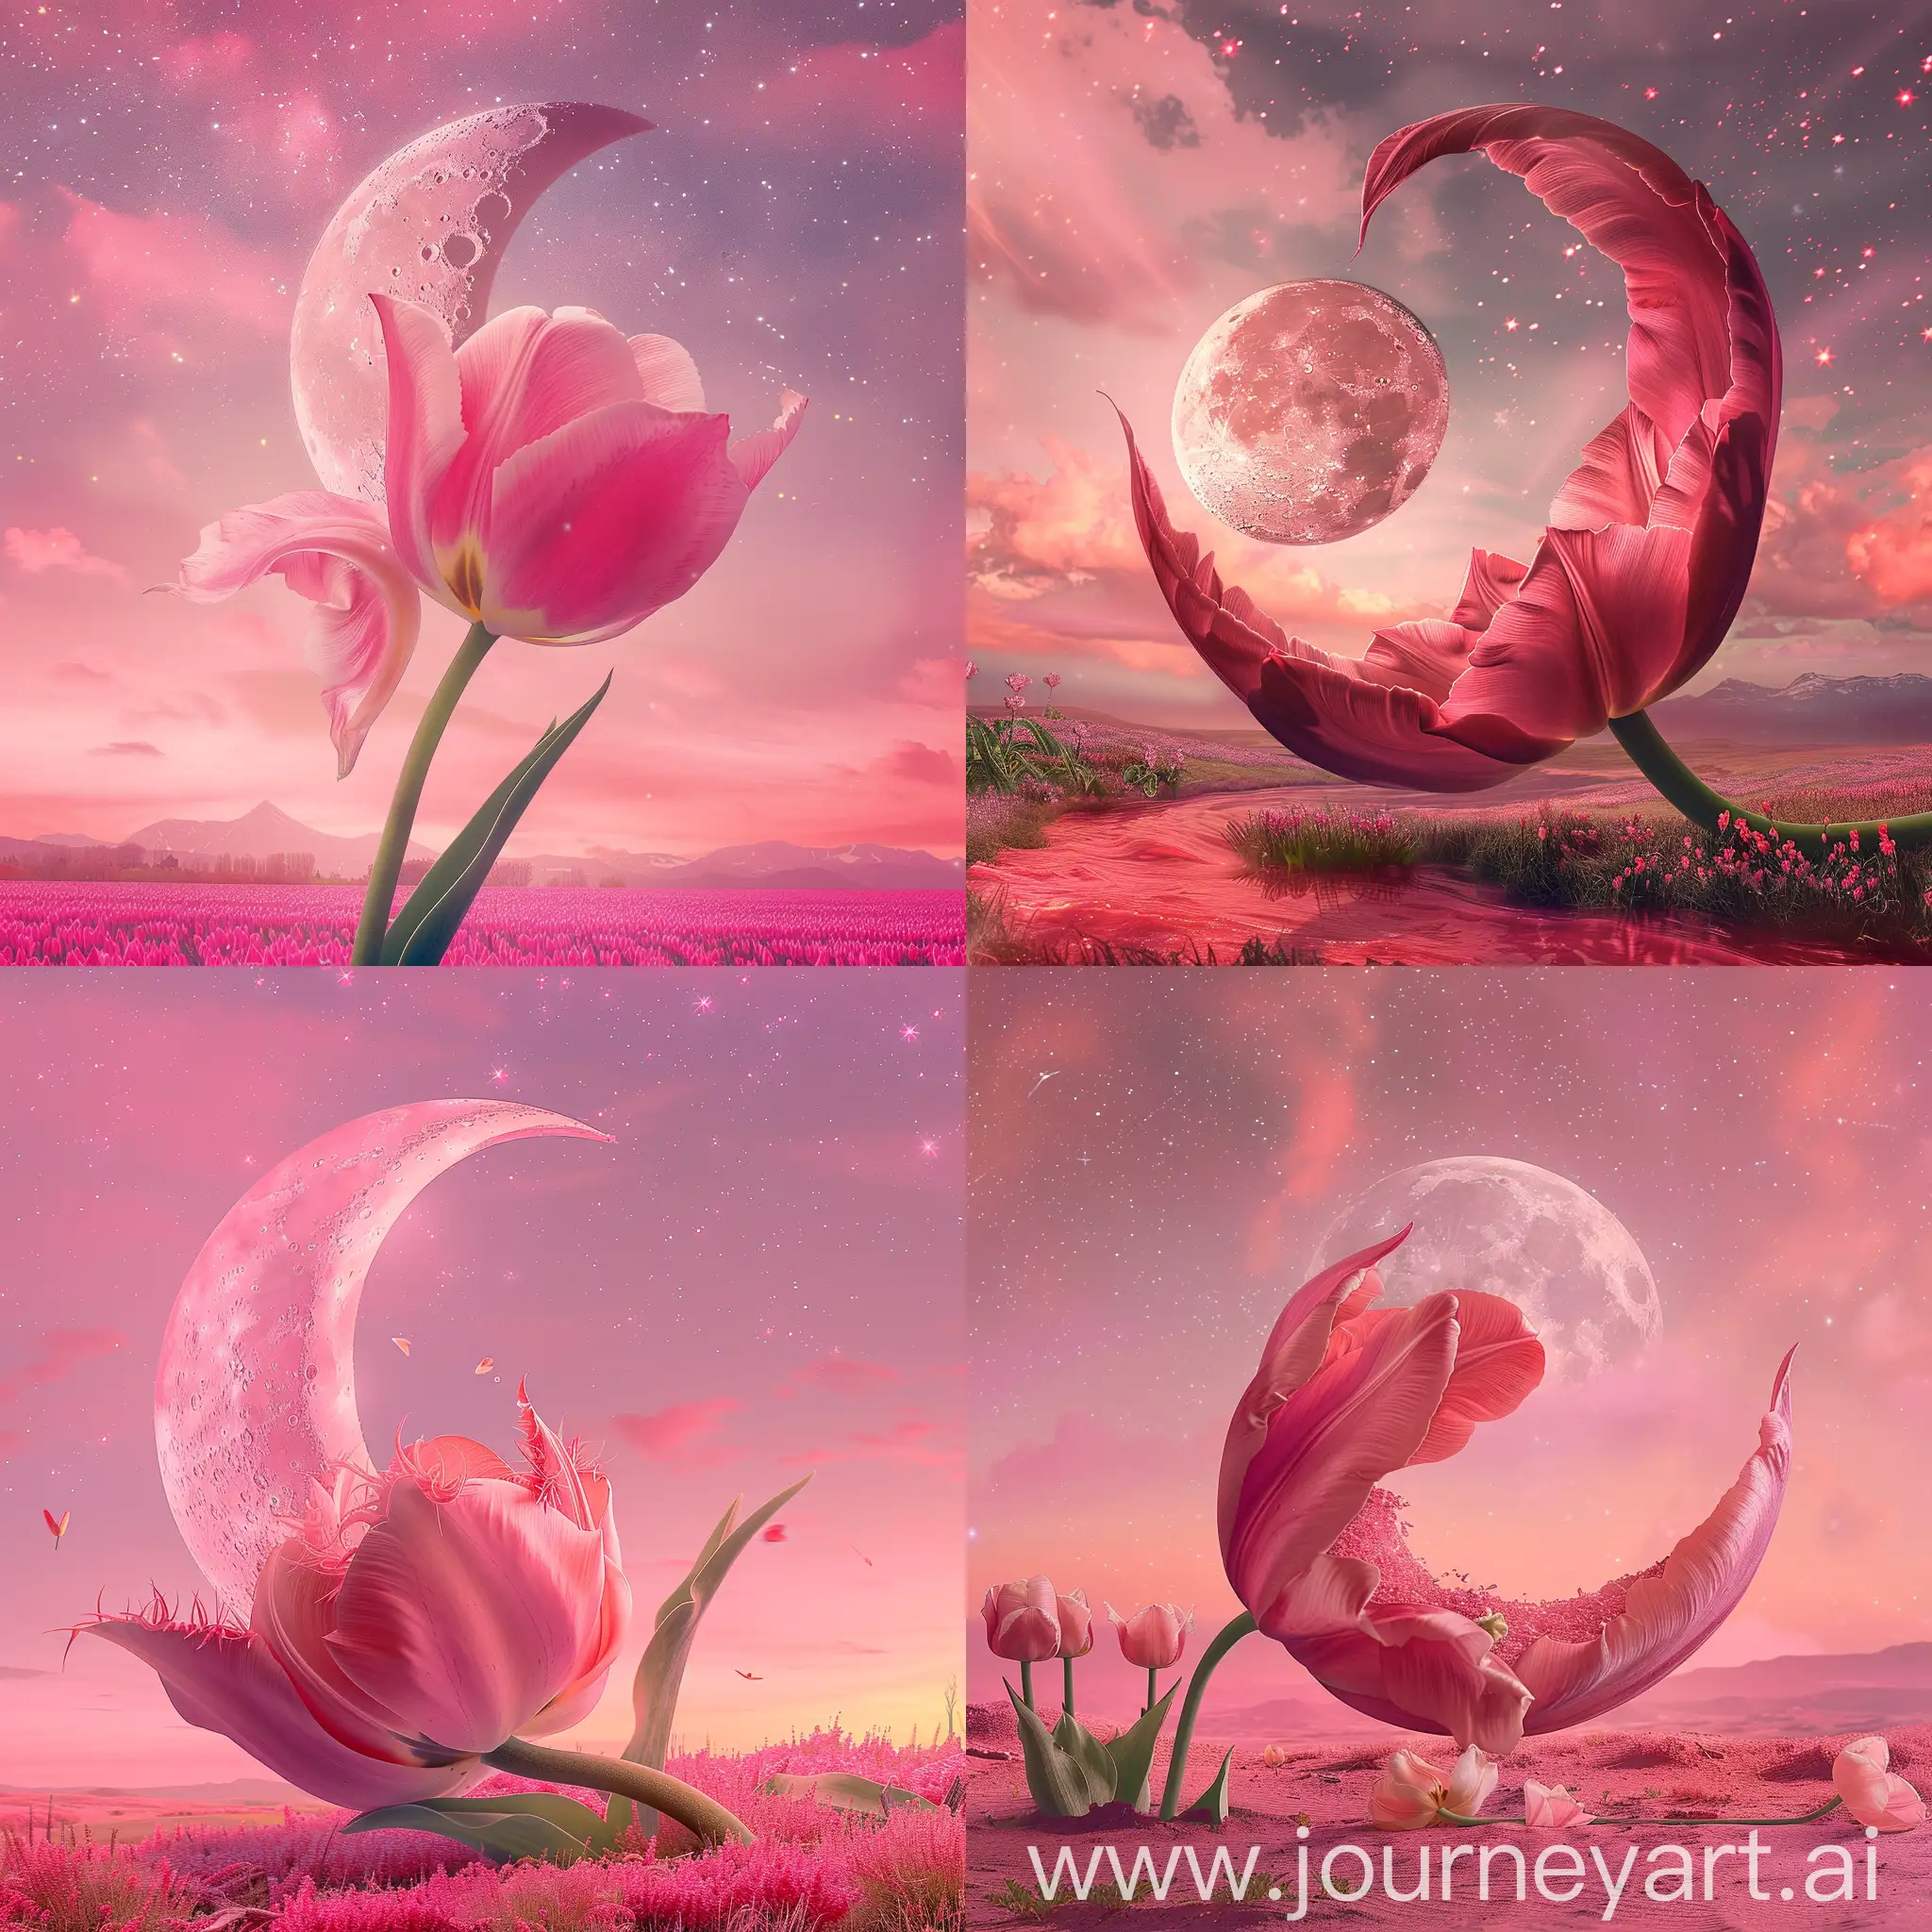 Enchanting-Pink-Moon-Rests-in-WindBent-Tulip-under-Starry-Pink-Sky